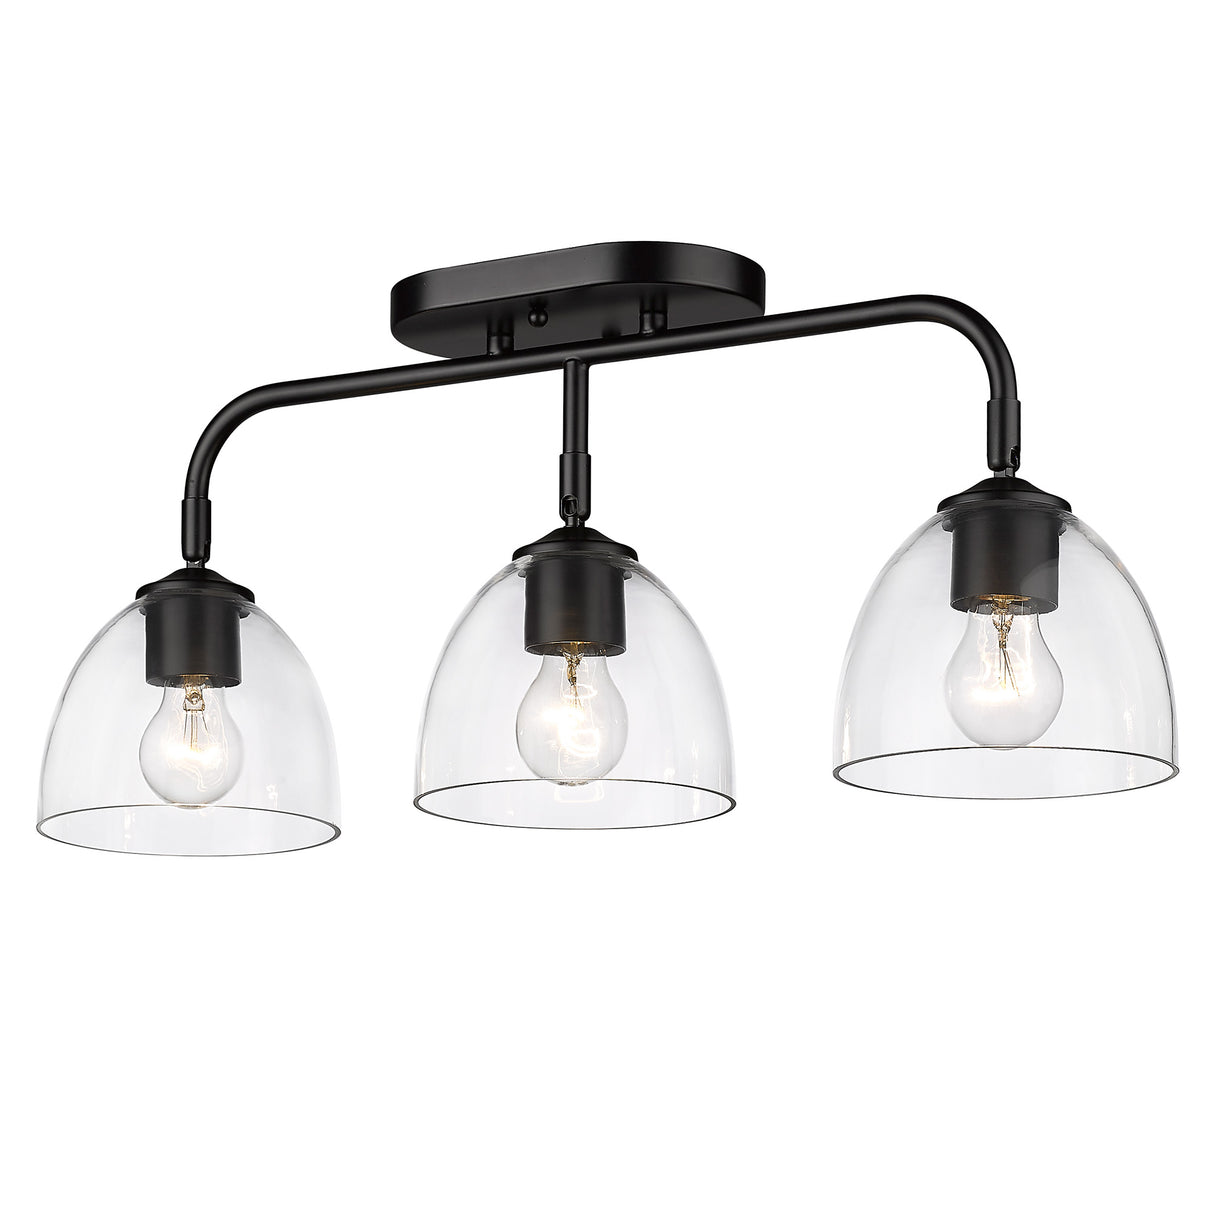 Roxie 3 Light Semi-Flush in Matte Black with Matte Black Accents and Clear Glass Shade